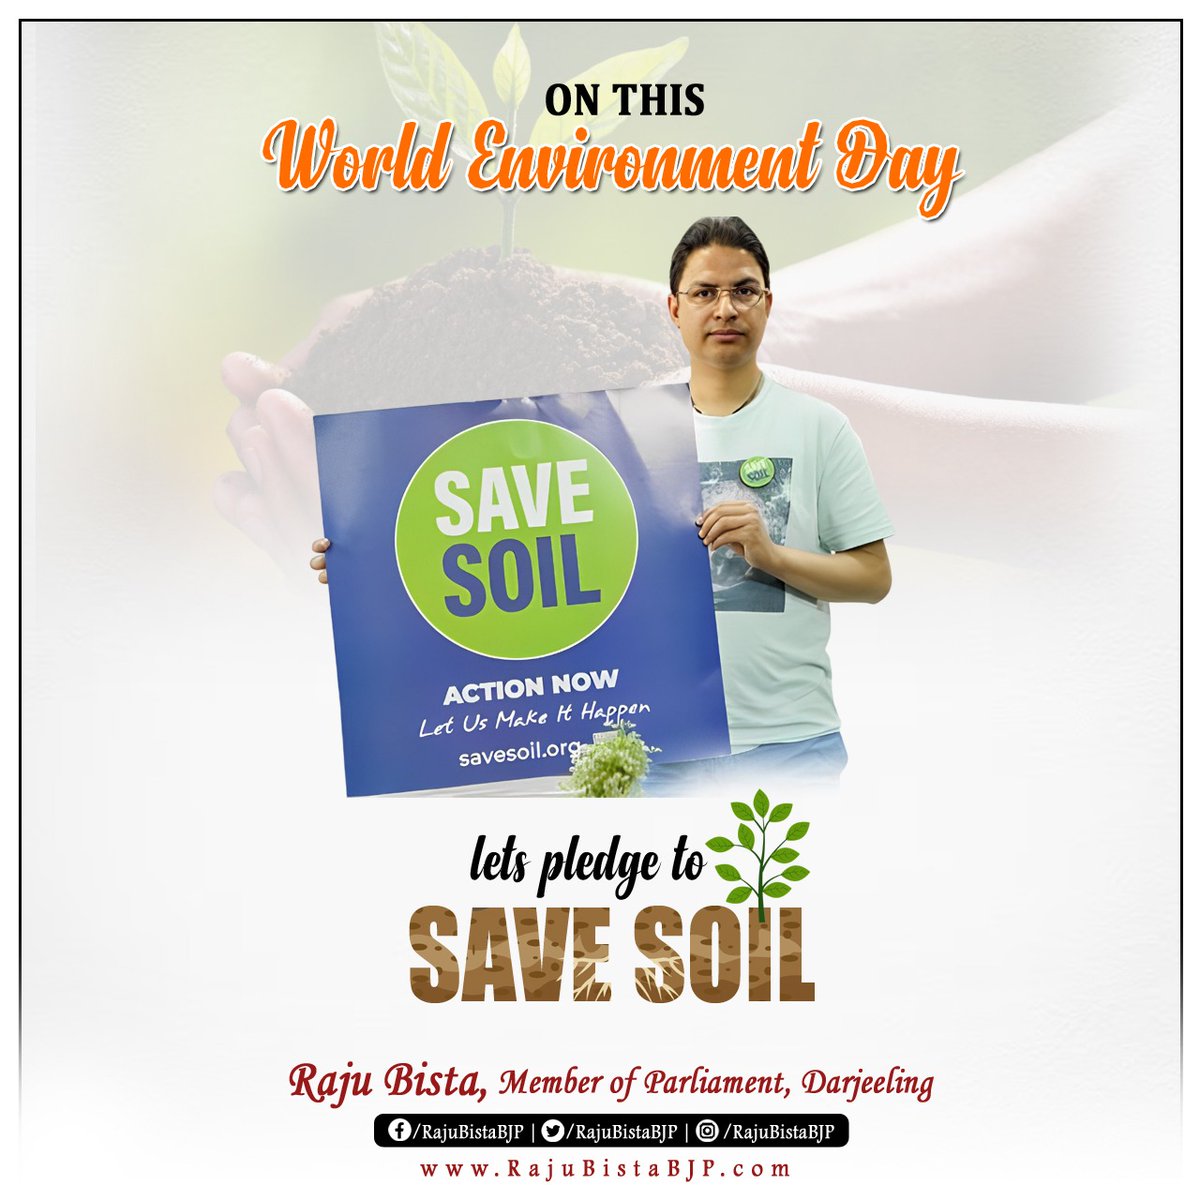 Greetings of 'World Environment Day' to everyone.

Let us be sensible and protect our nature and leave a healthy environment for generations to come.

#SaveSoil
#GreenDarjeeling #EnvironmentDay23